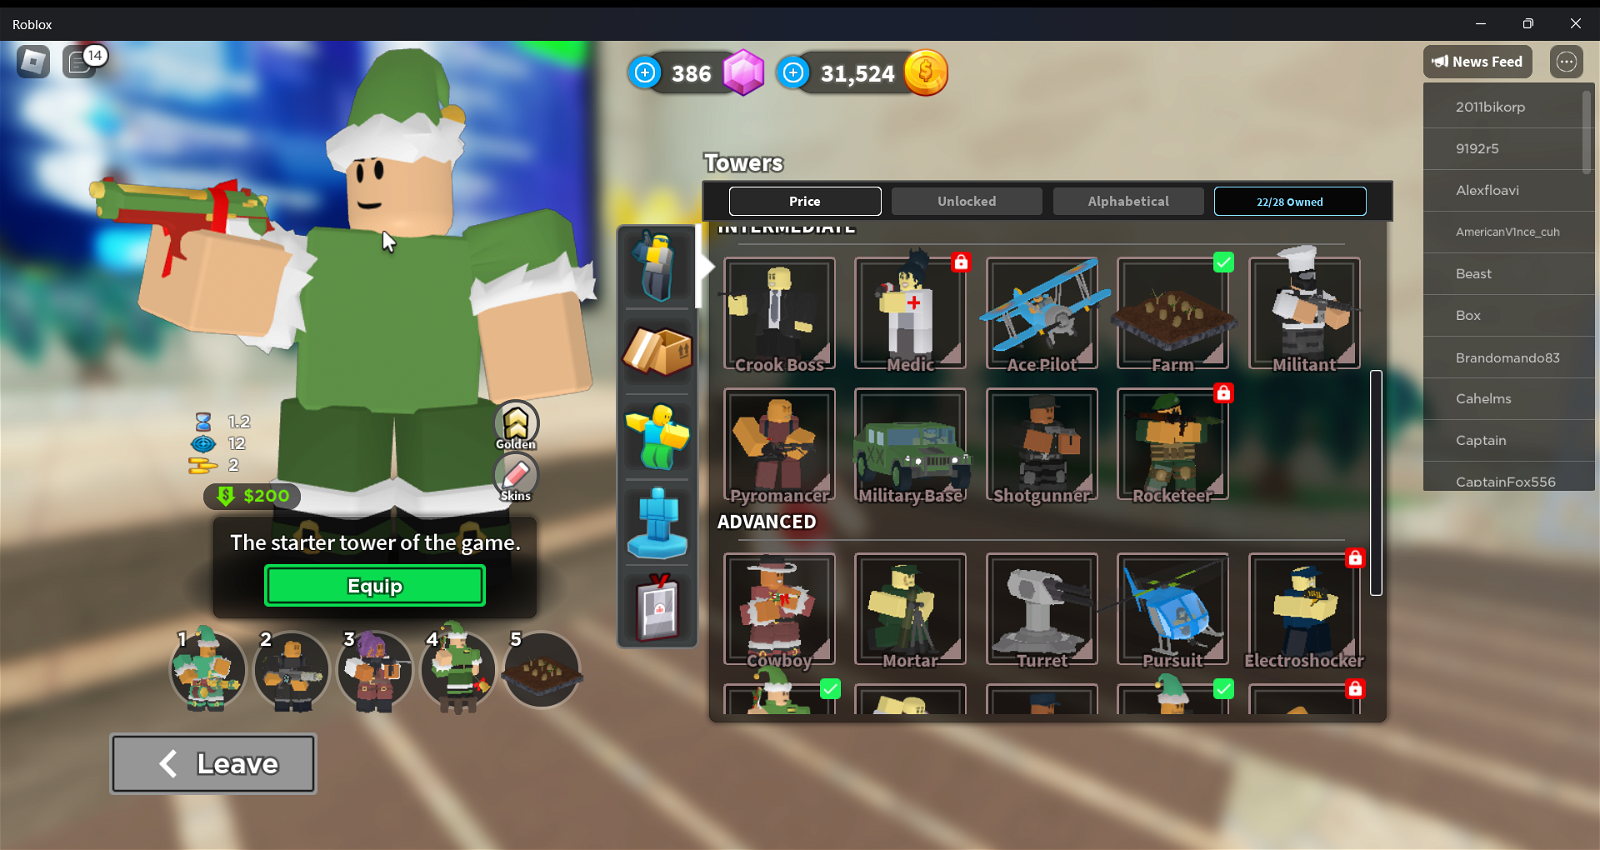 Trading Roblox account for a better account #Trading #roblox #robloxac